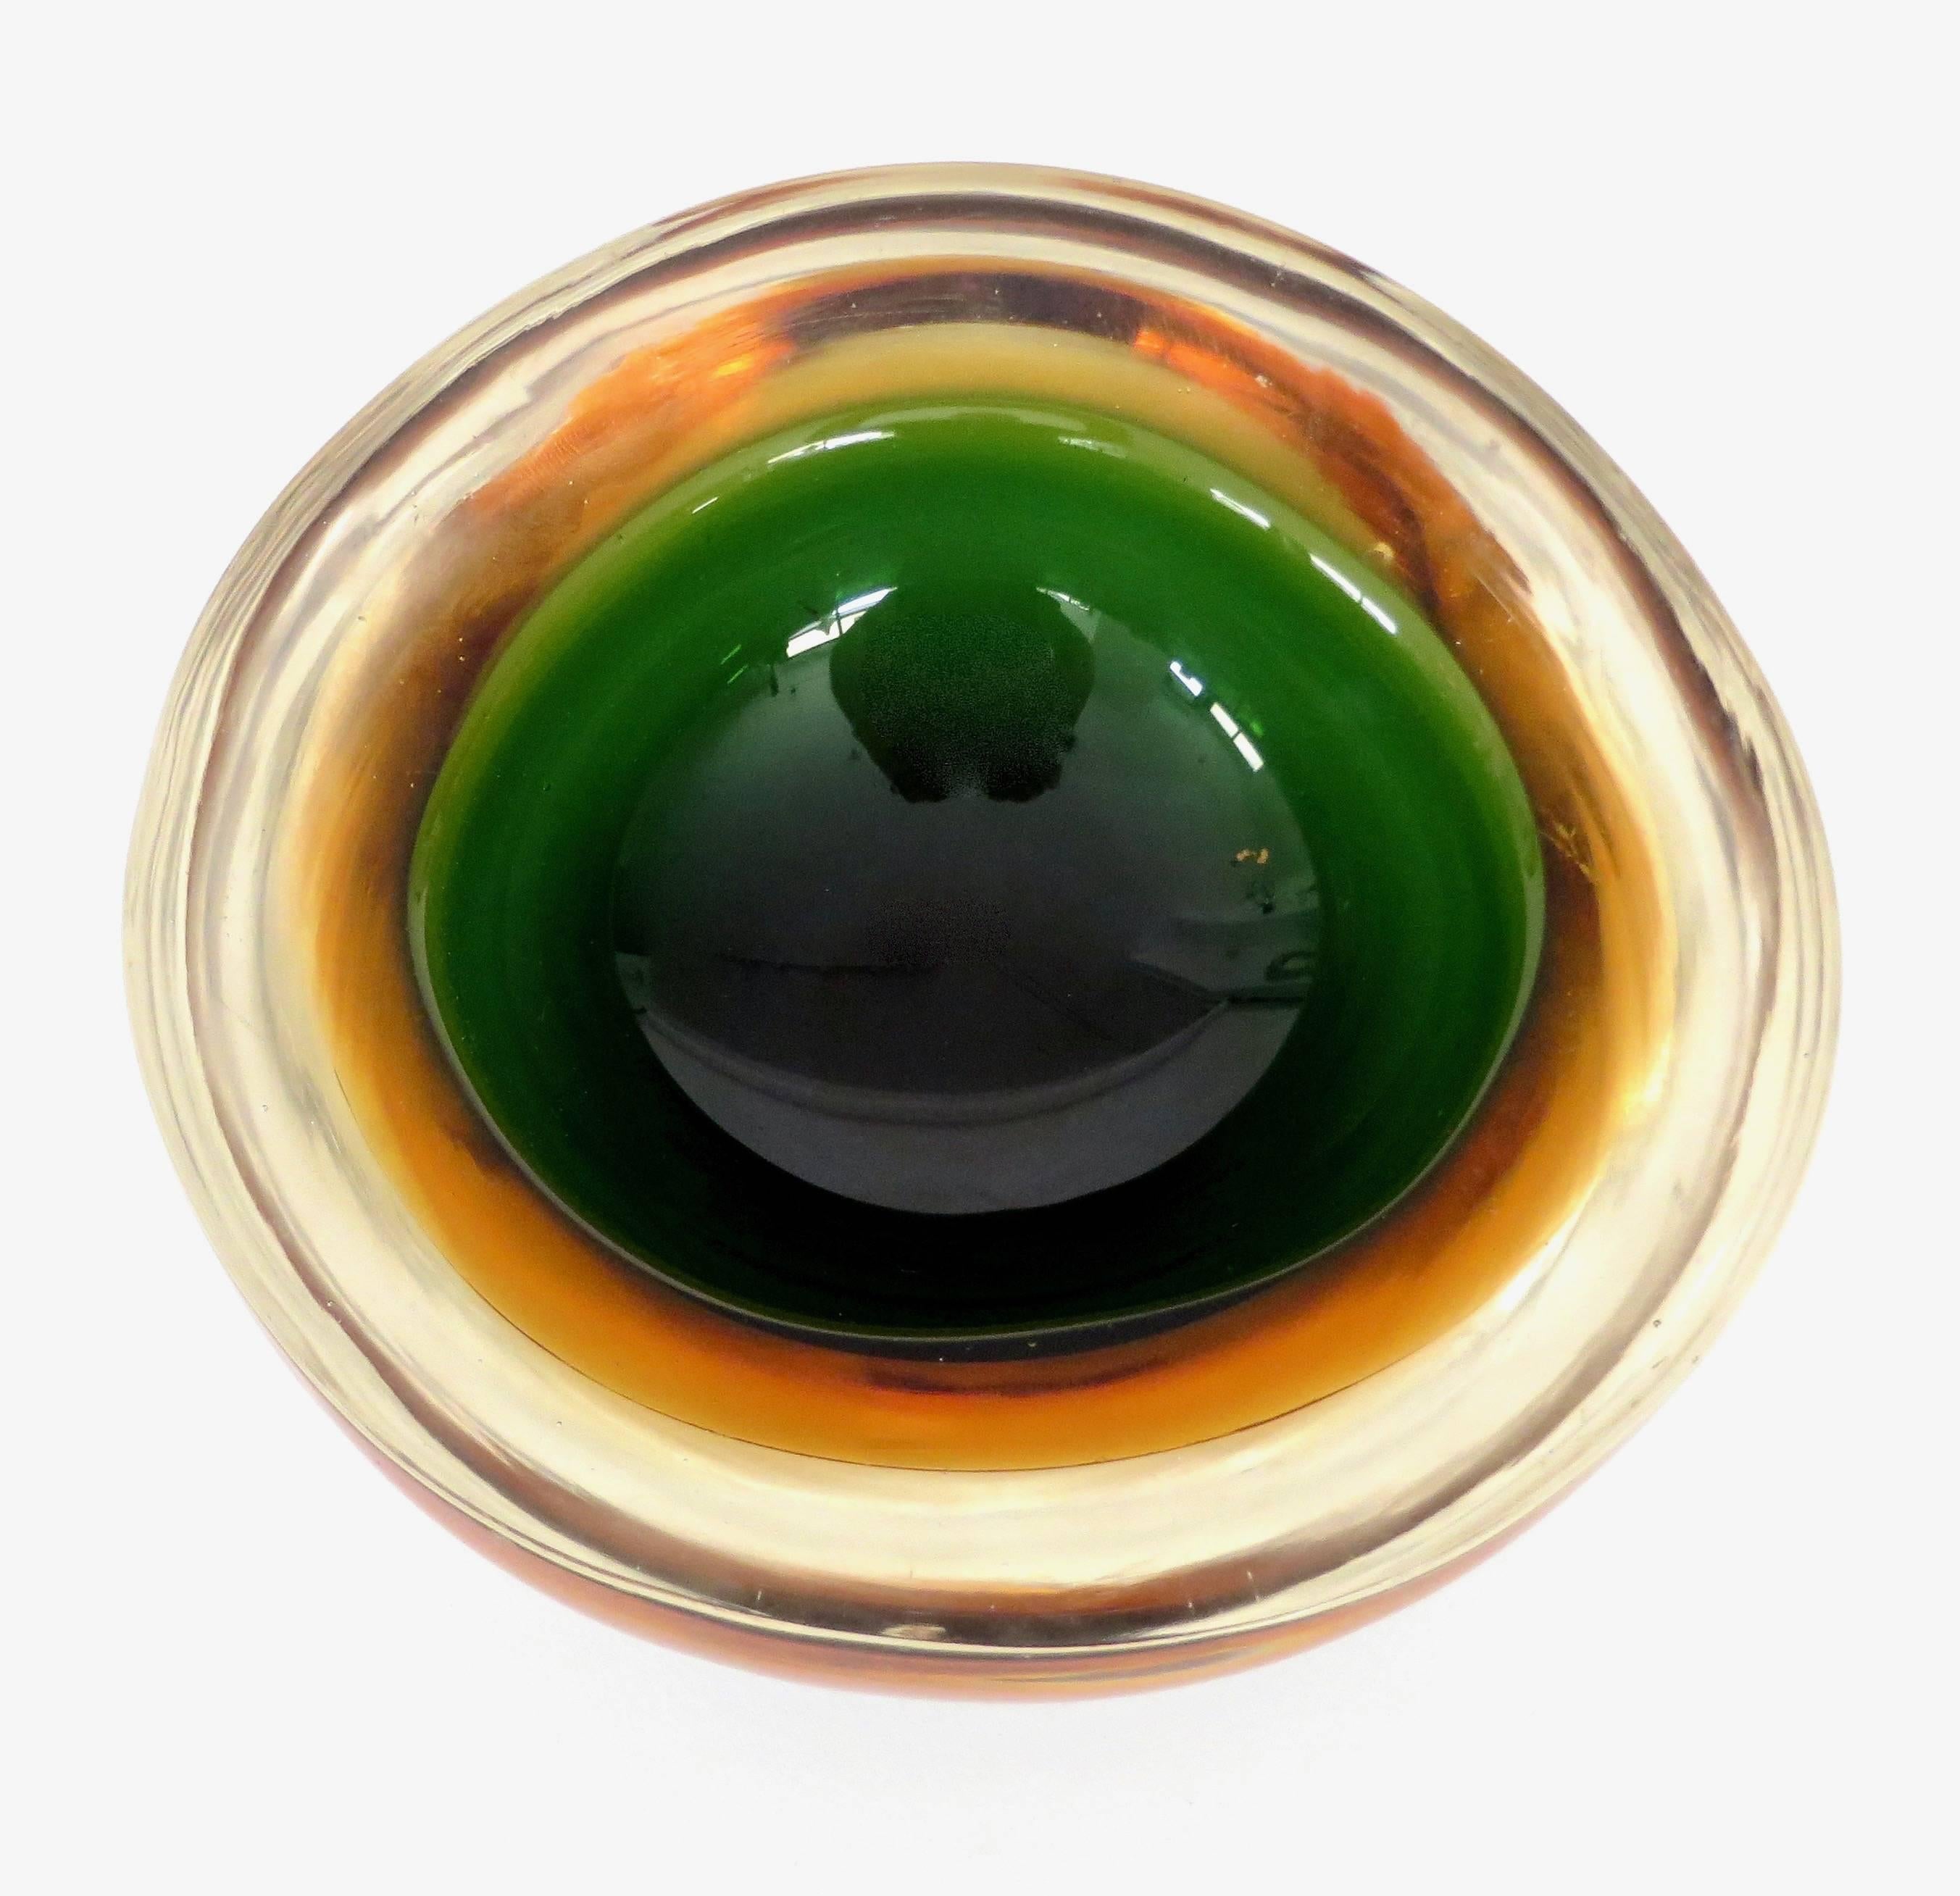 Flavio Poli Italian Sommerso Murano glass bowl in colors ranging from orange, green, green black and clear.
Very wonderful thick glass bowl to be used in many applications. Perfect condition. No chips.